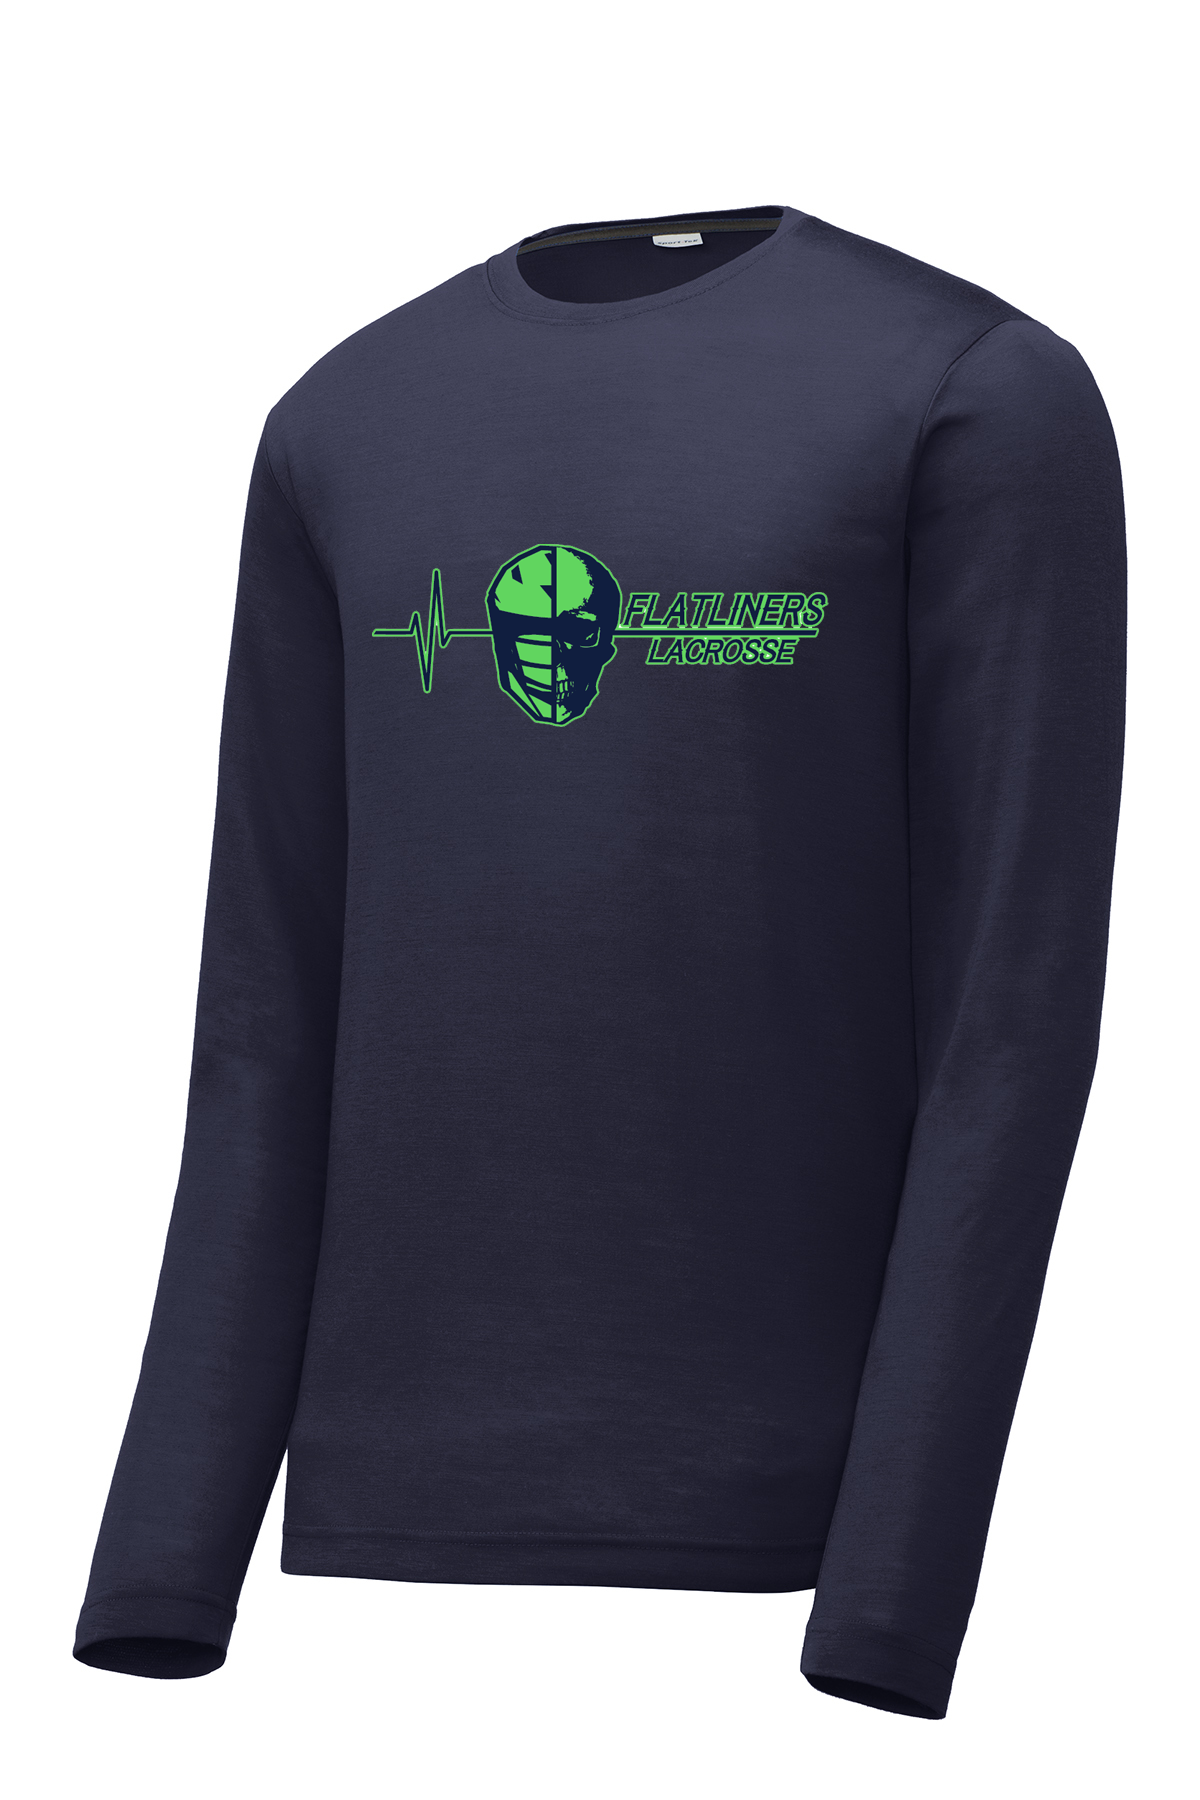 Flatliners Lacrosse Navy Long Sleeve CottonTouch Performance Shirt